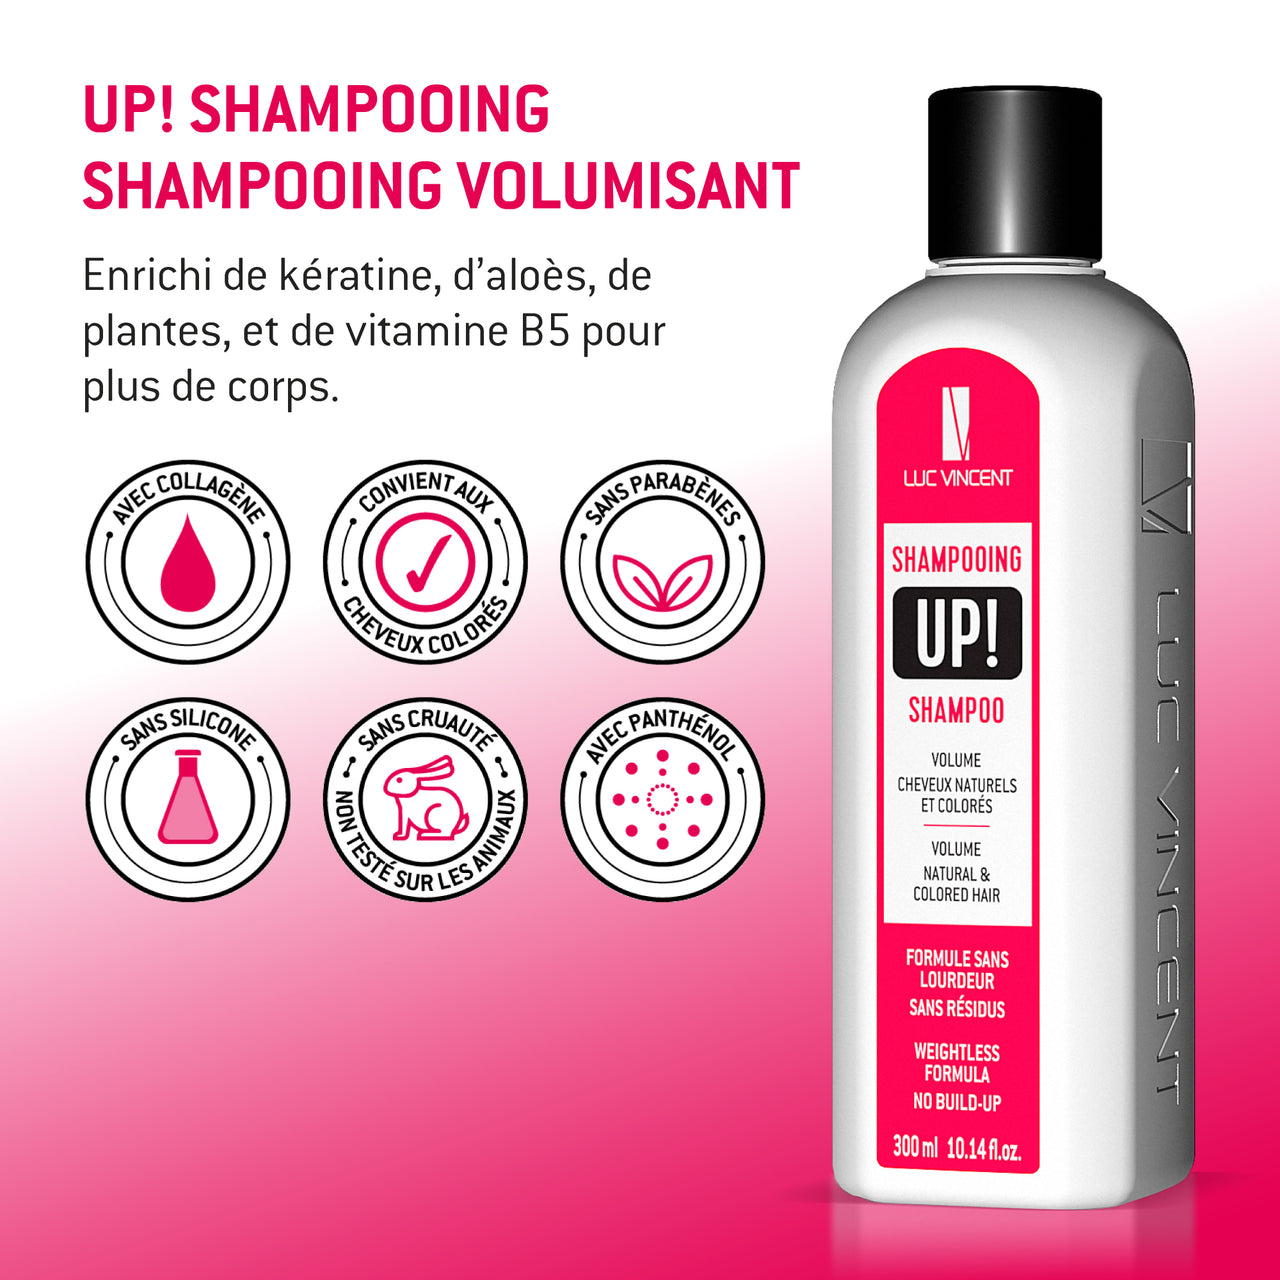 UP! SHAMPOOING VOLUMISANT - Luc Vincent